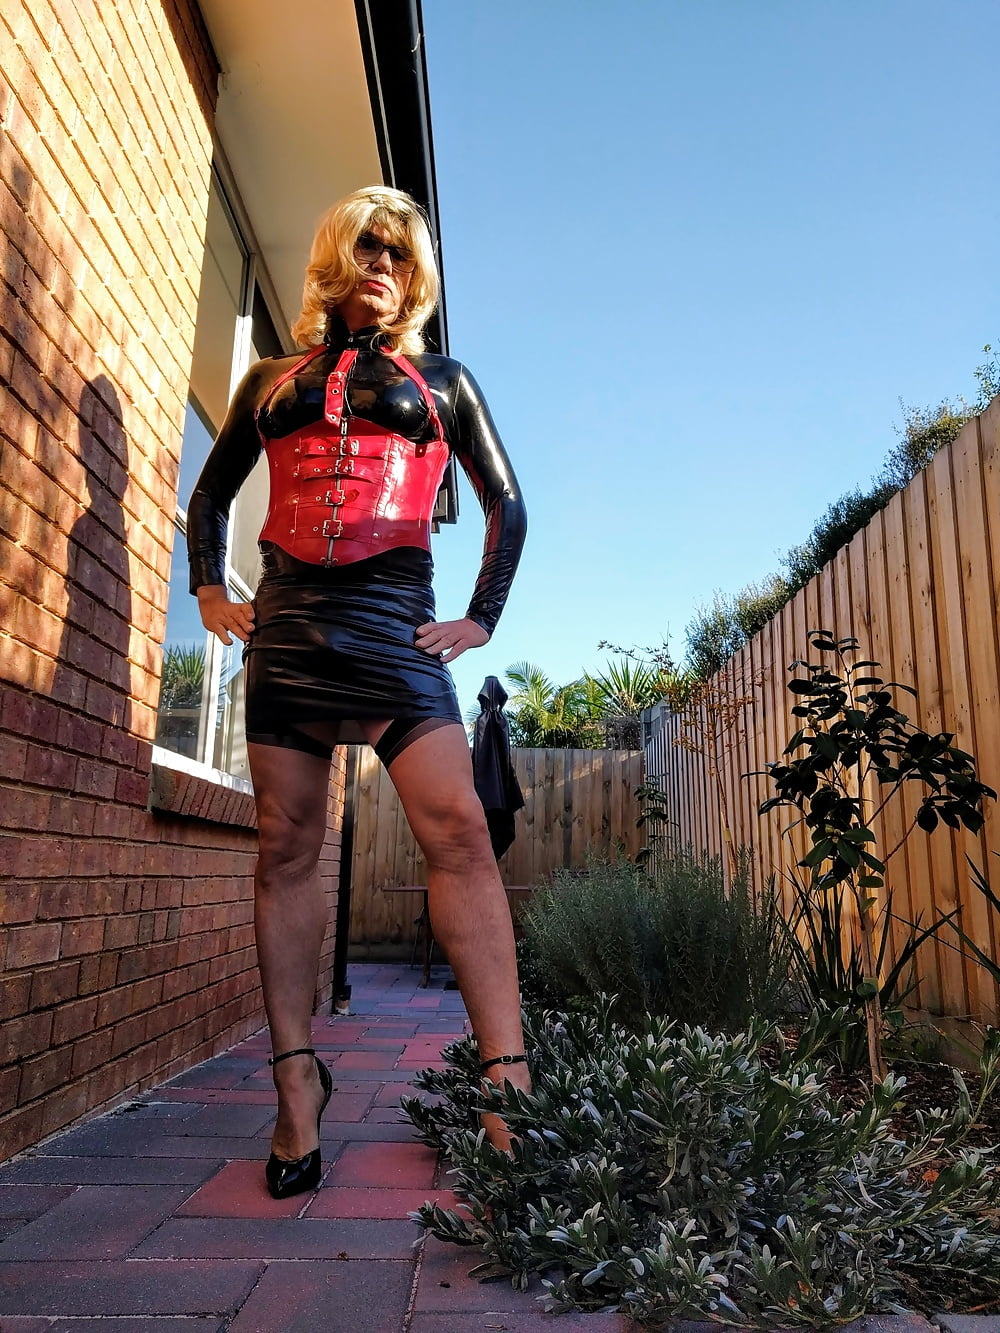 New latex skirt on a sunny Melbourne day #107021293